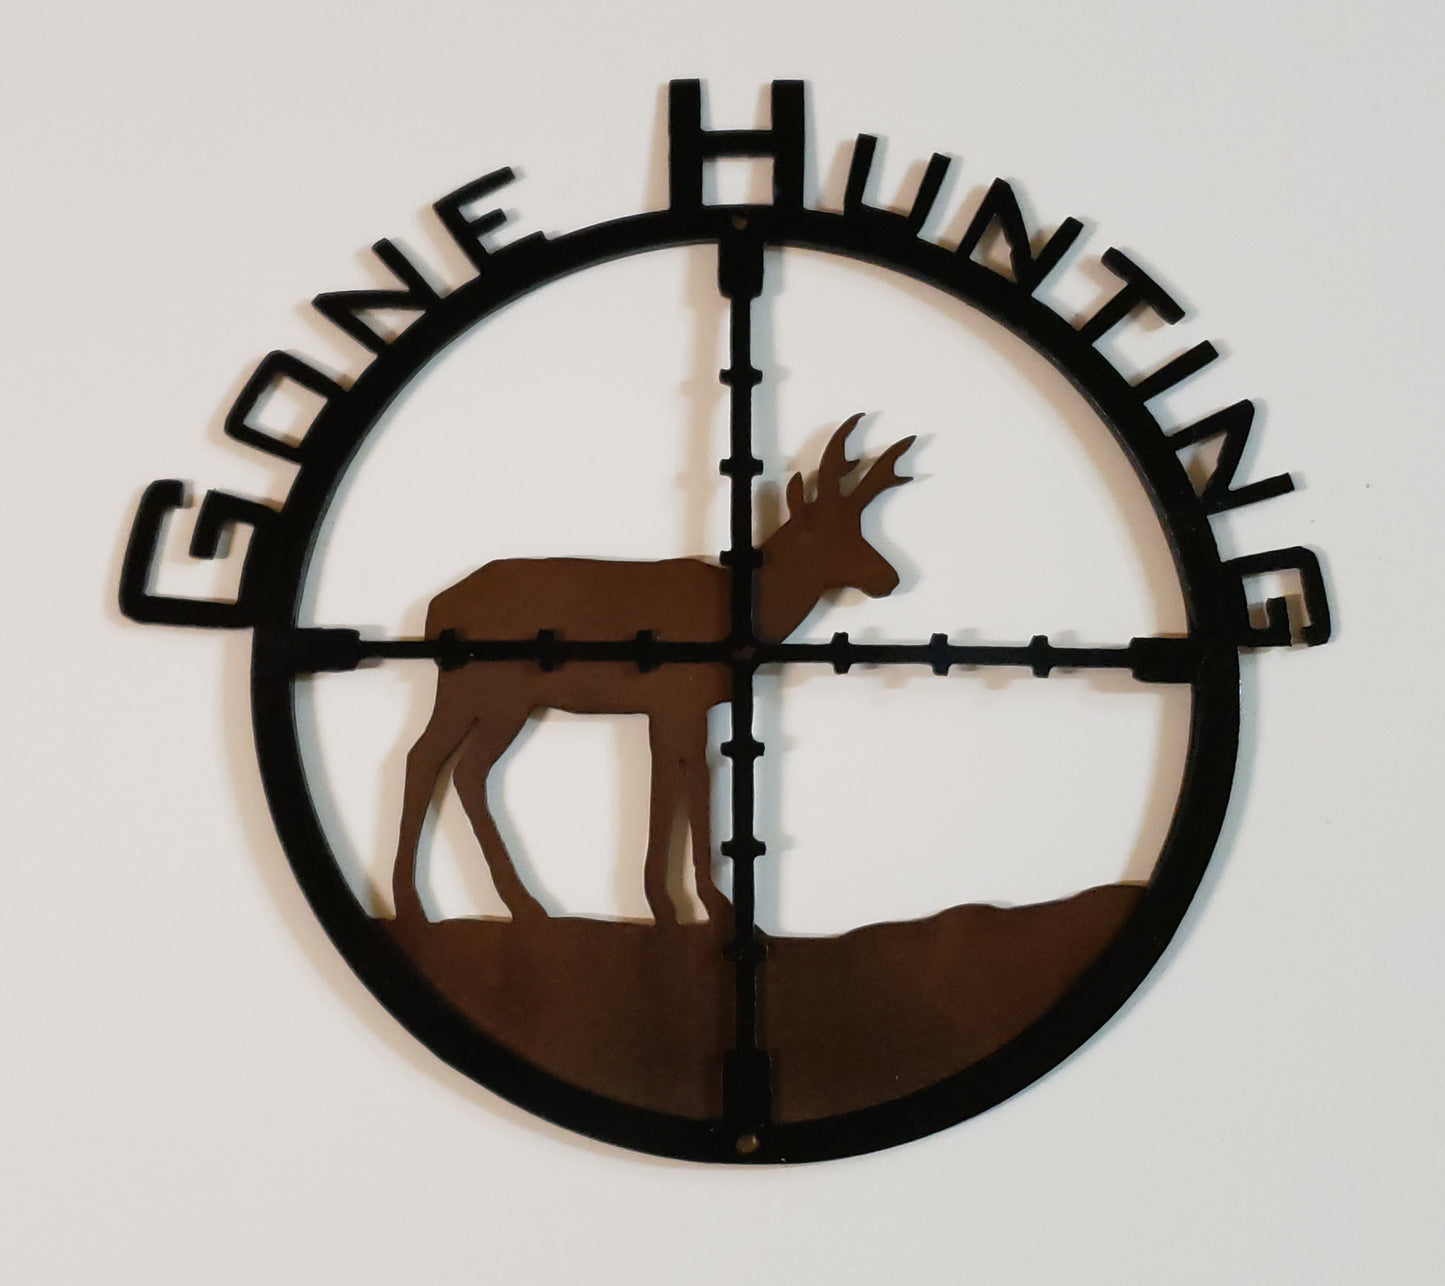 A medium metal sign with gone hunting cut out in it and a pronghorn in the cross hairs of a gun sight  Grinded and sandblasted with polished heat finish rustic patina colors  Glossy clear coat protective enamel  13" long x 12" wide x 1" high  Perfect for that man cave or rustic cabin 